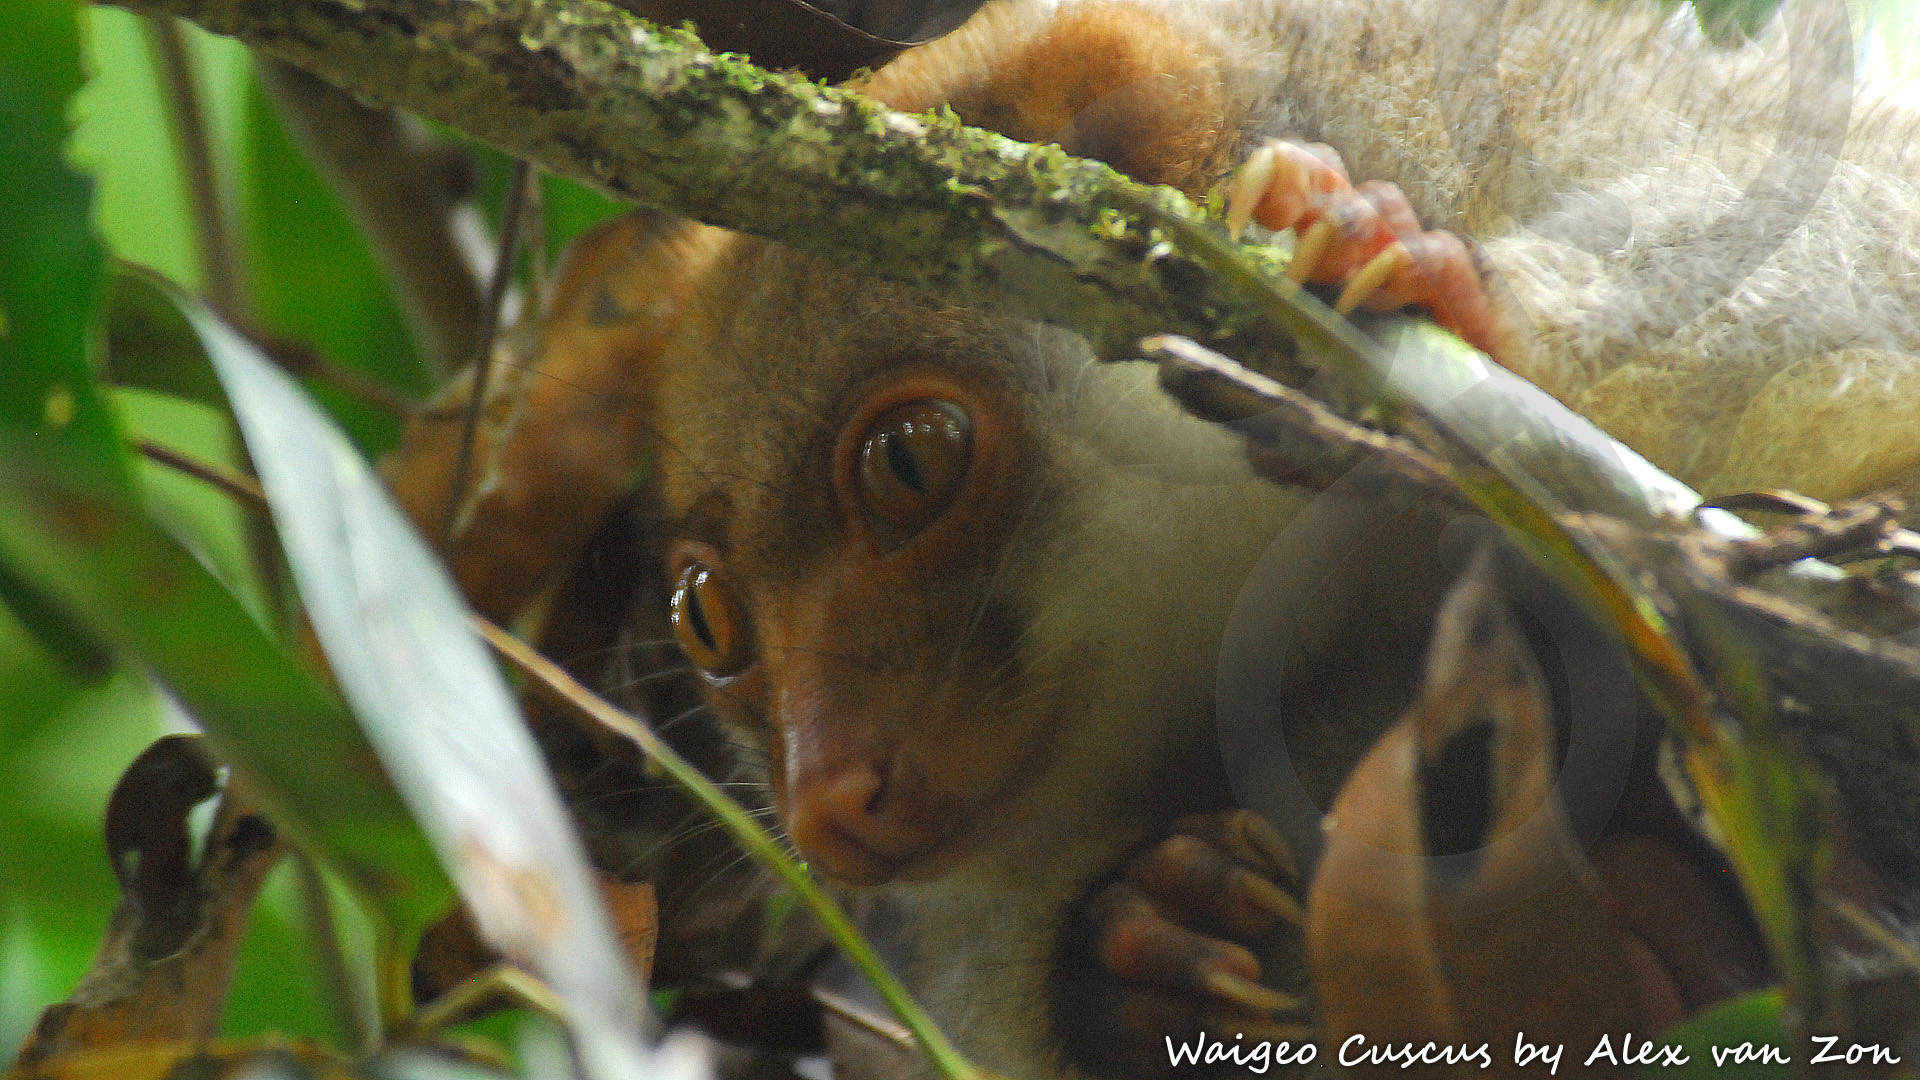 Getting up-close and personal with the endemic and endangered marsupial Waigeo Cuscus Spilocuscus papuensis could be one of the highlights of an outdoors adventure to the largest Raja Ampat island of Waigeo. Copyright © Alex van Zon